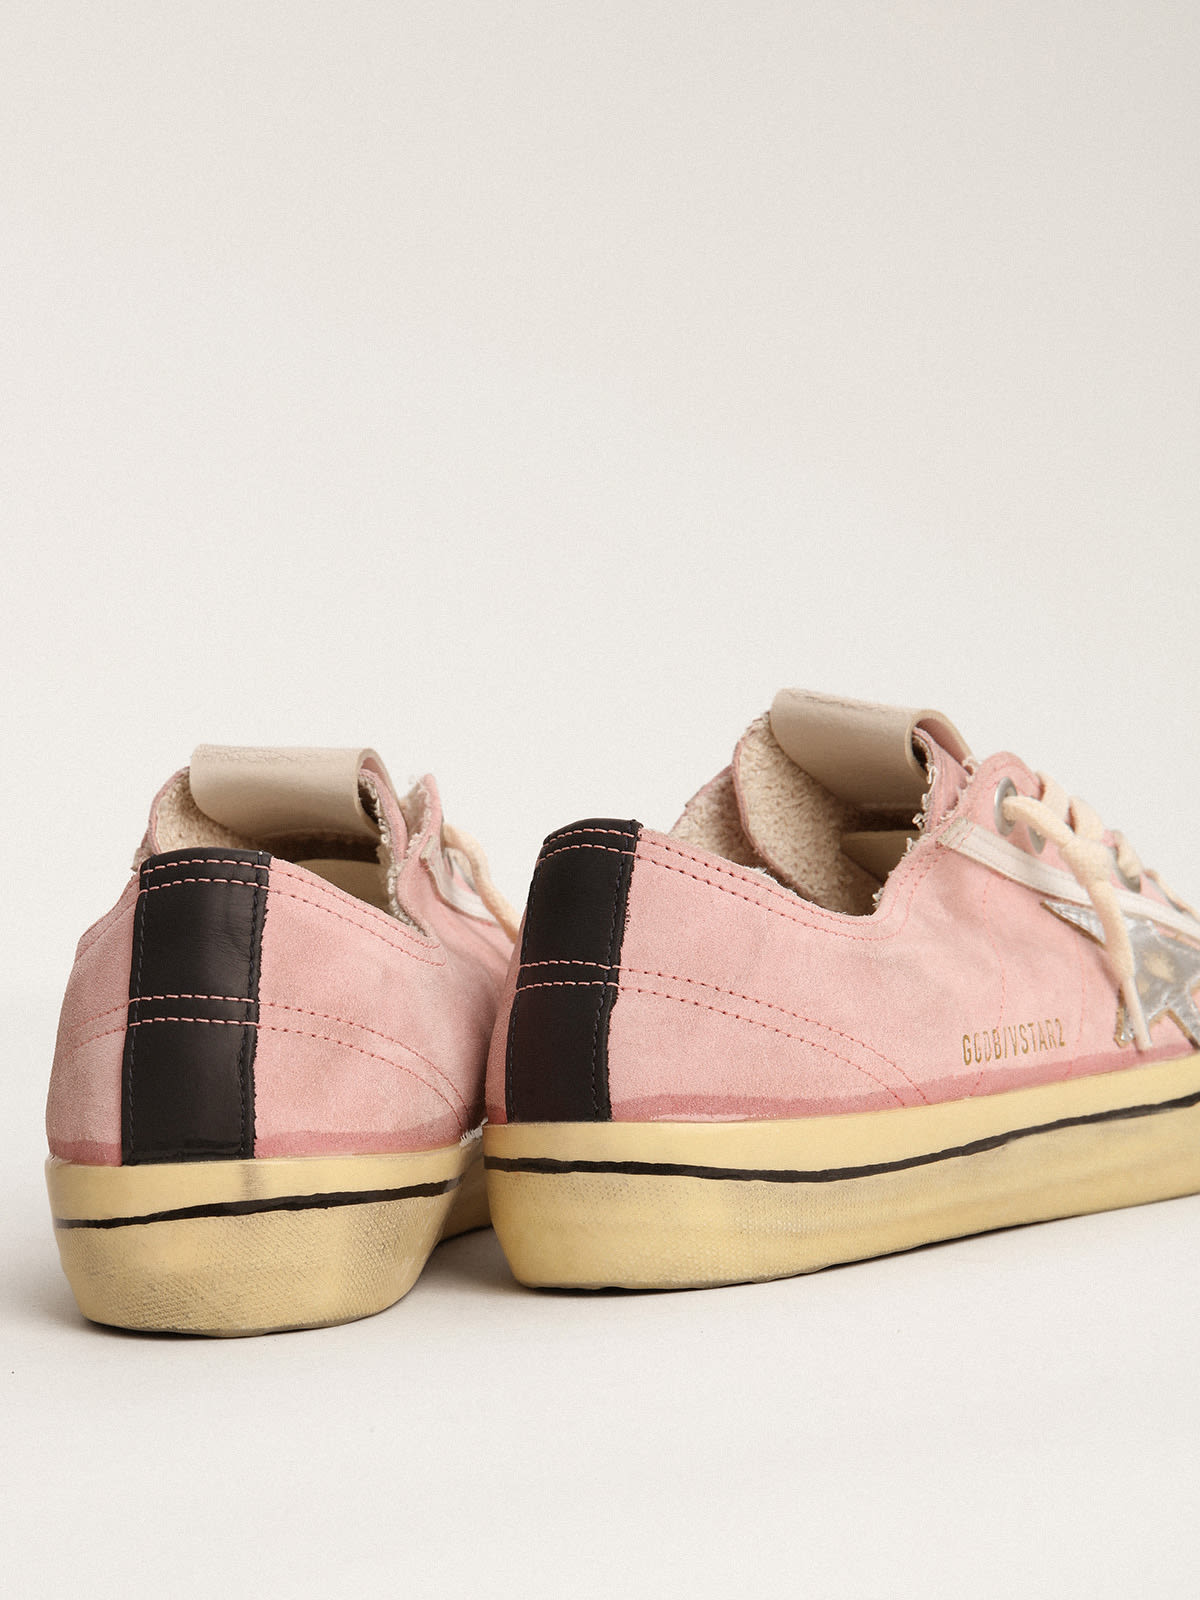 Golden Goose - Women's V-Star LTD in baby pink suede with silver star in 